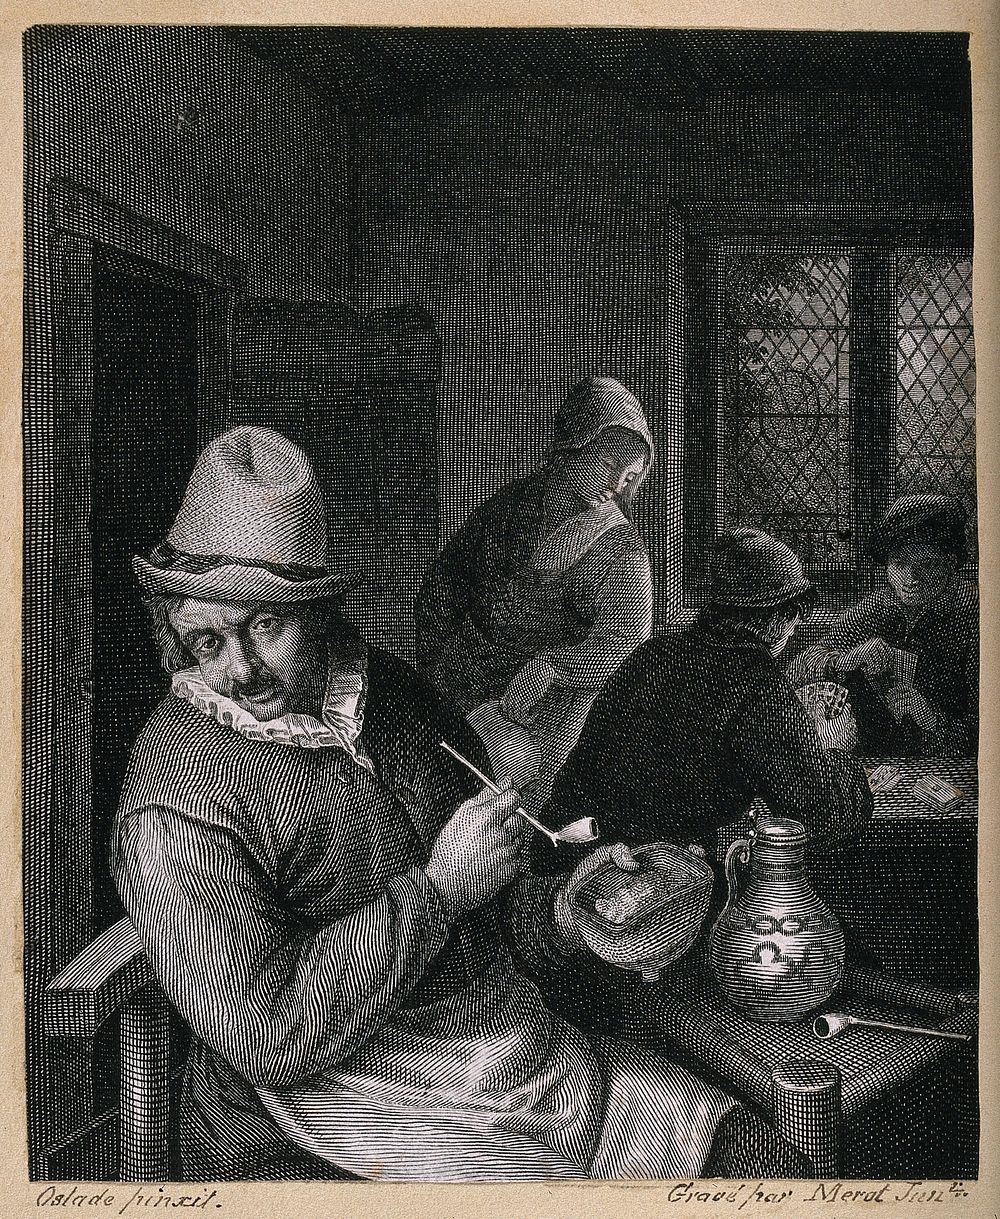 A man sitting indoors with tobacco pipe, jar and beer jug, behind a woman watches two card players. Engraving by Merot…